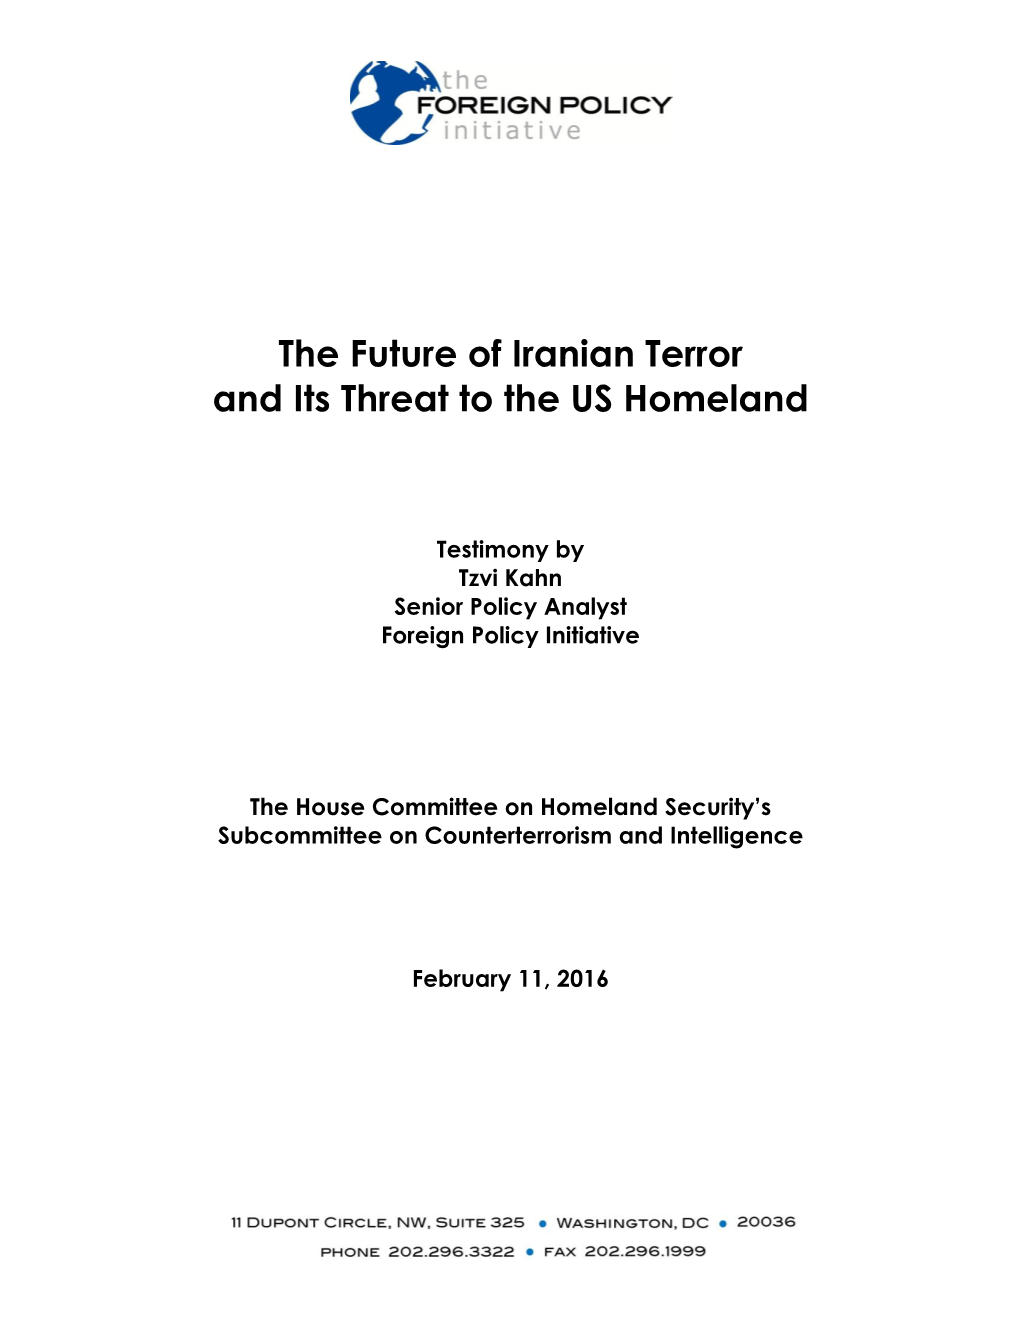 The Future of Iranian Terror and Its Threat to the US Homeland